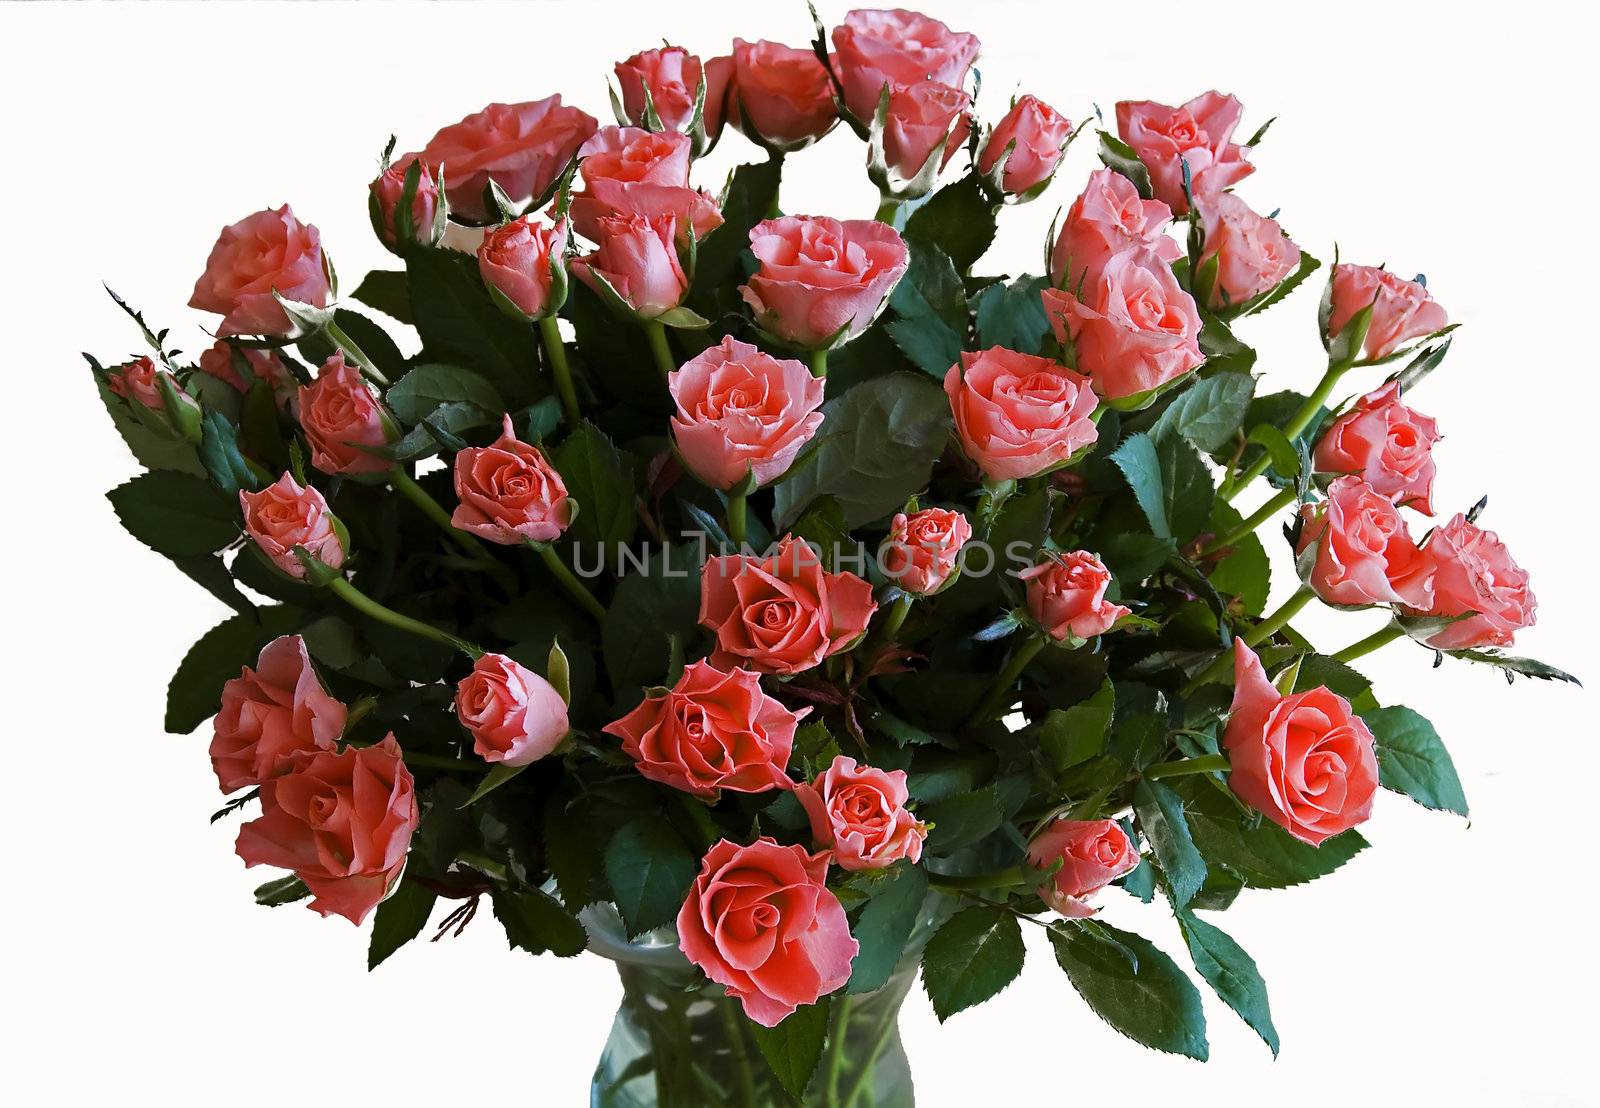 bouqet of red roses as a present for love